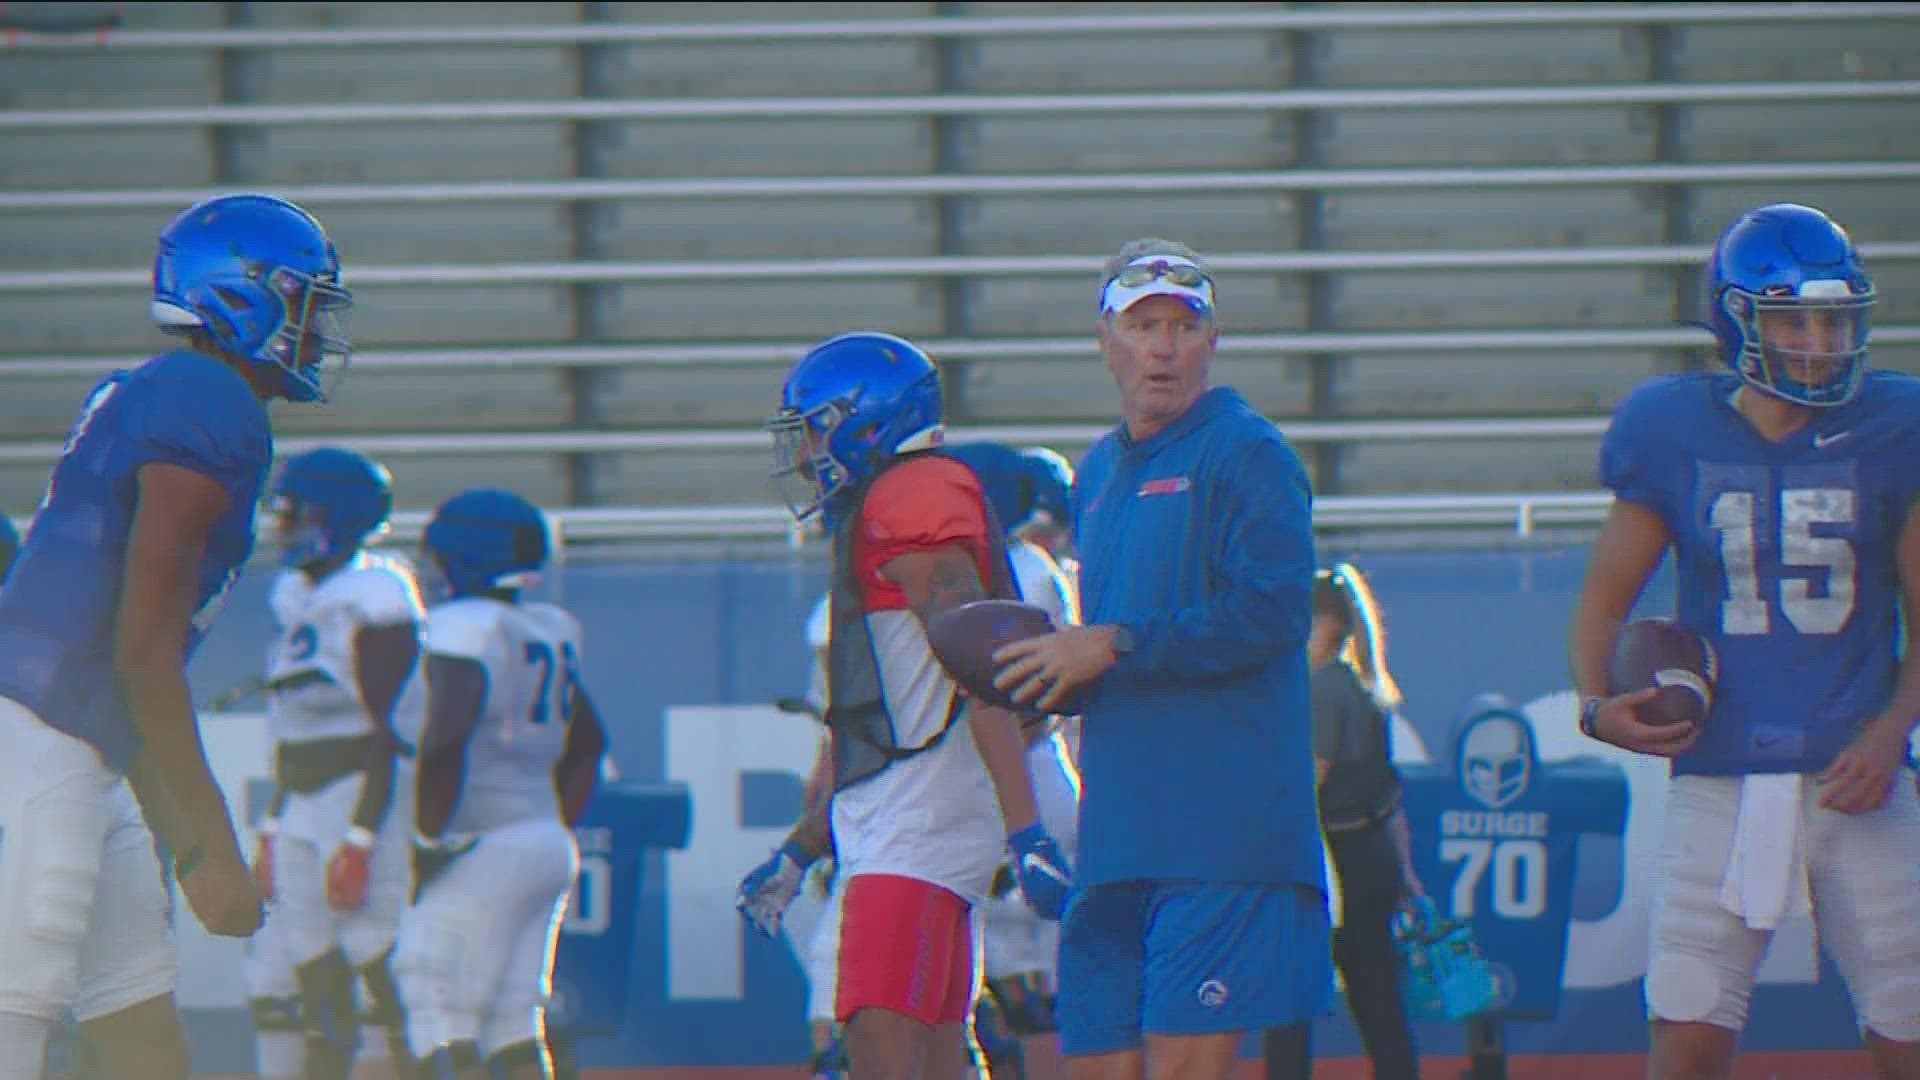 Koetter helped springboard Boise State into FBS relevance back in the late 1990s, winning back-to-back Big West titles.